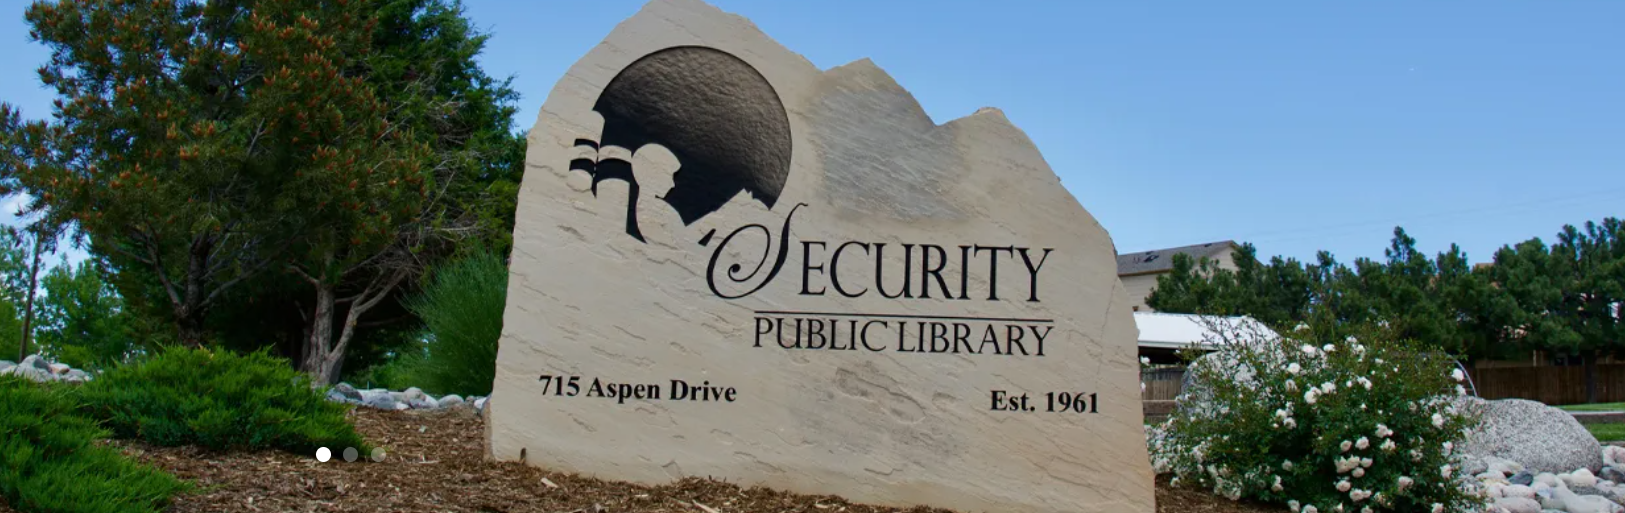 Gallery 1 - Security Public Library